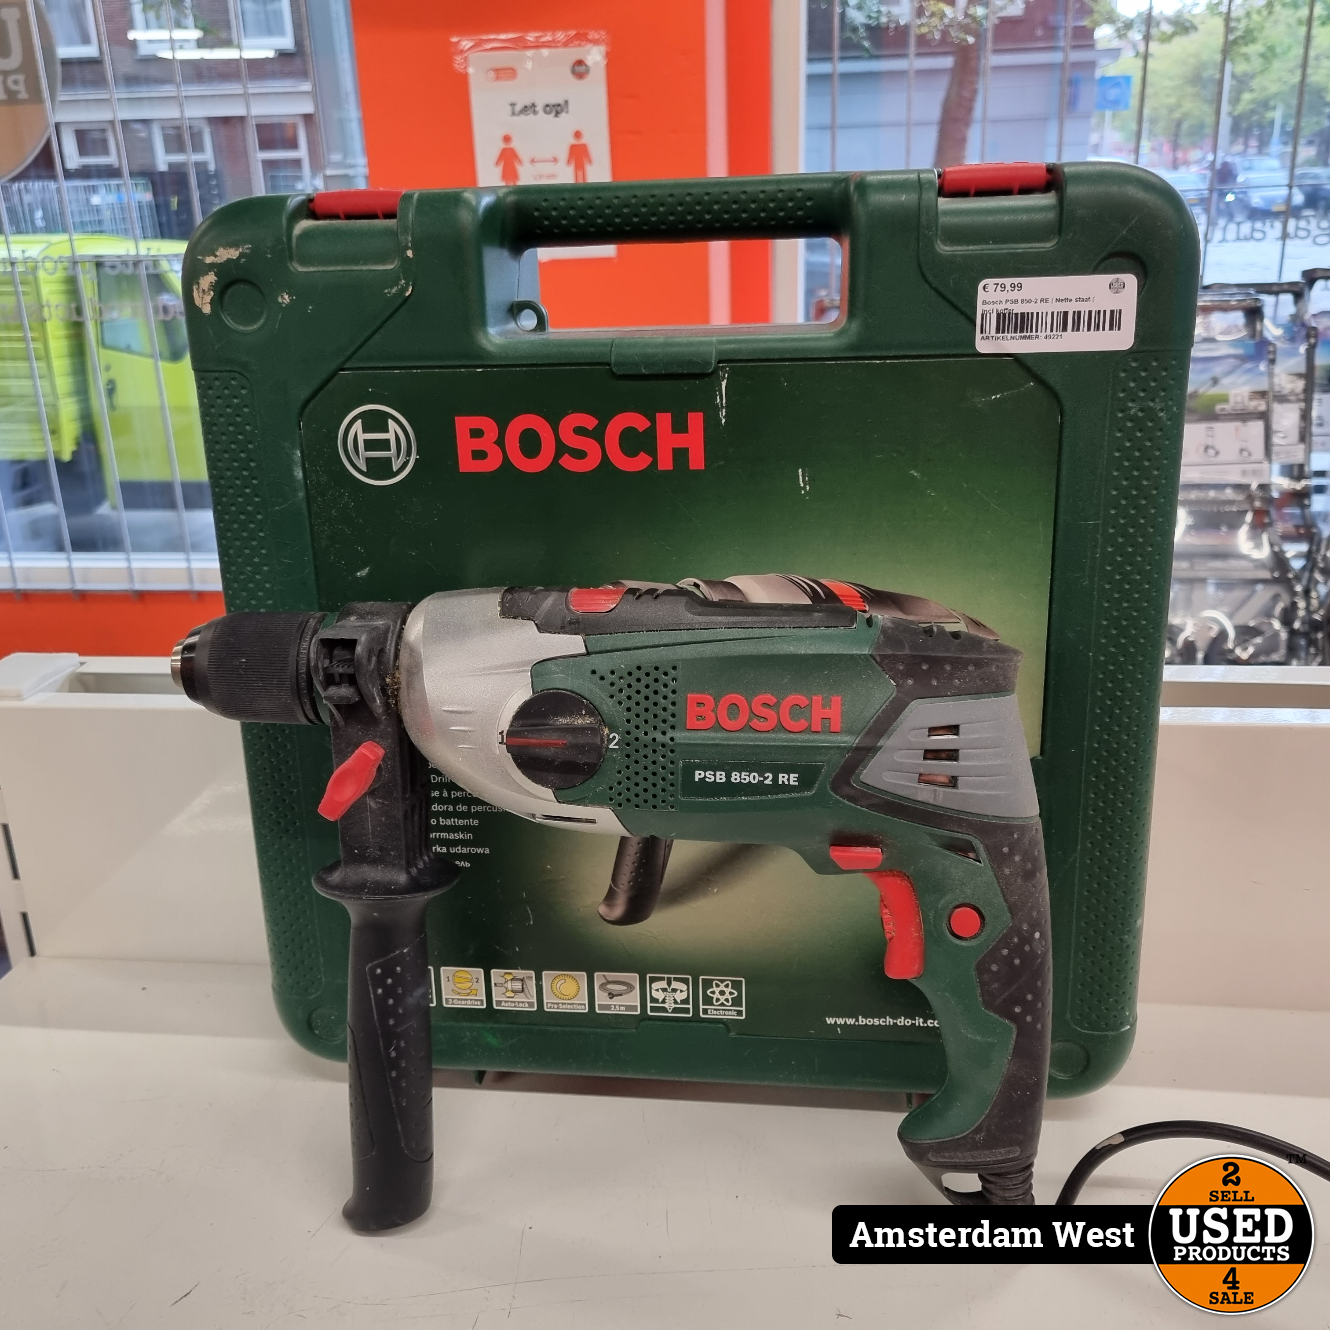 boezem rijk Scheiding Bosch PSB 850-2 RE | Nette staat | Incl koffer - Used Products Amsterdam  West